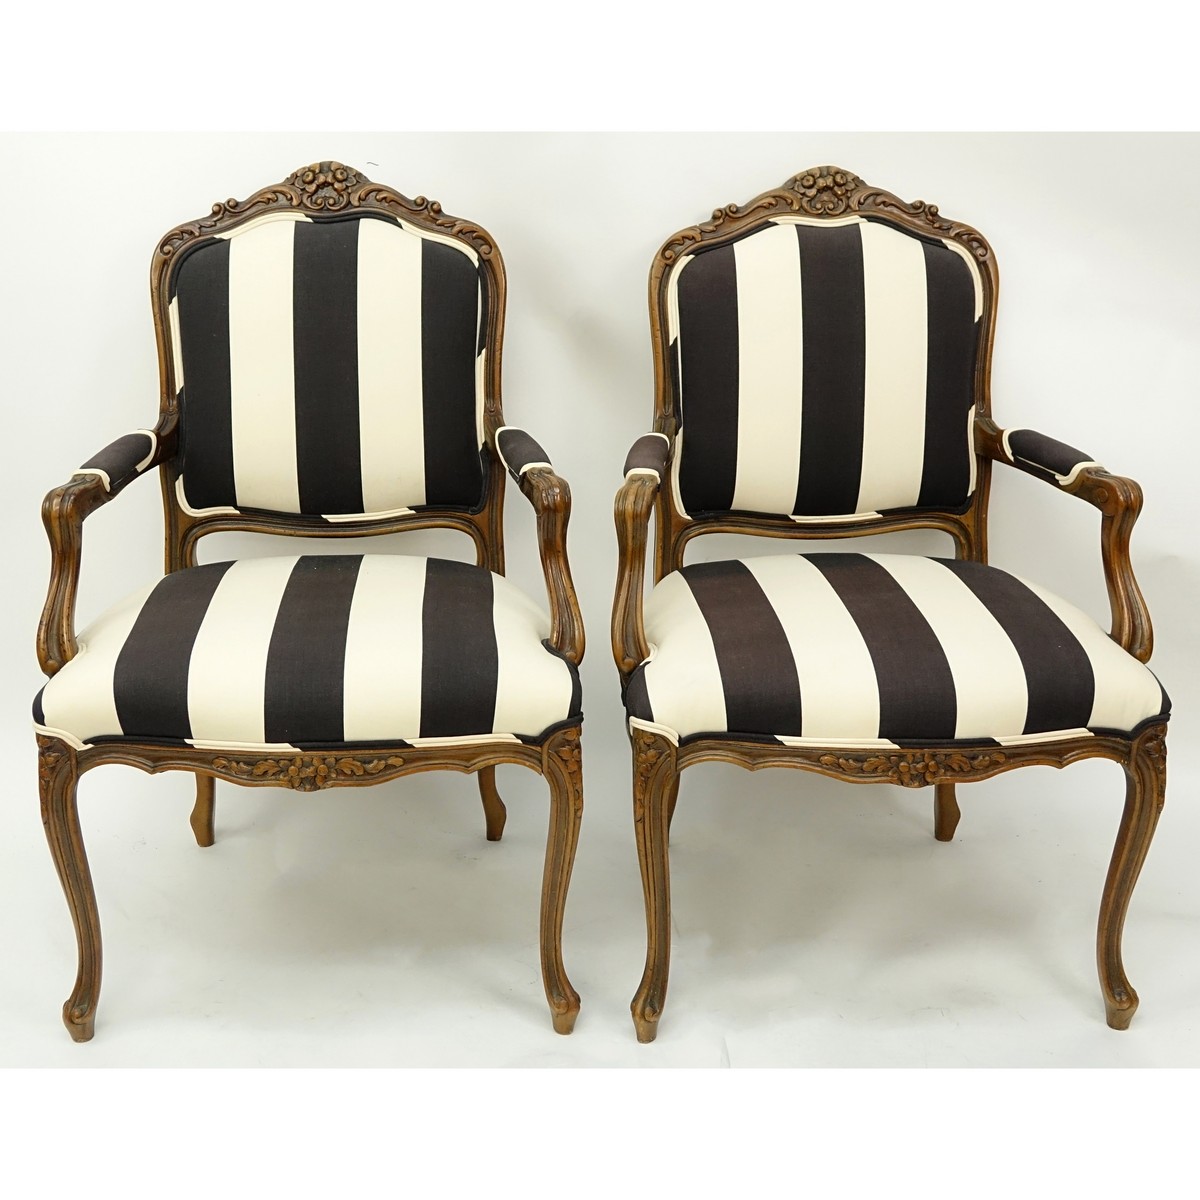 Pair of 20th Century Carved Wood and Upholstered Fauteuils. Light scratches to wood.